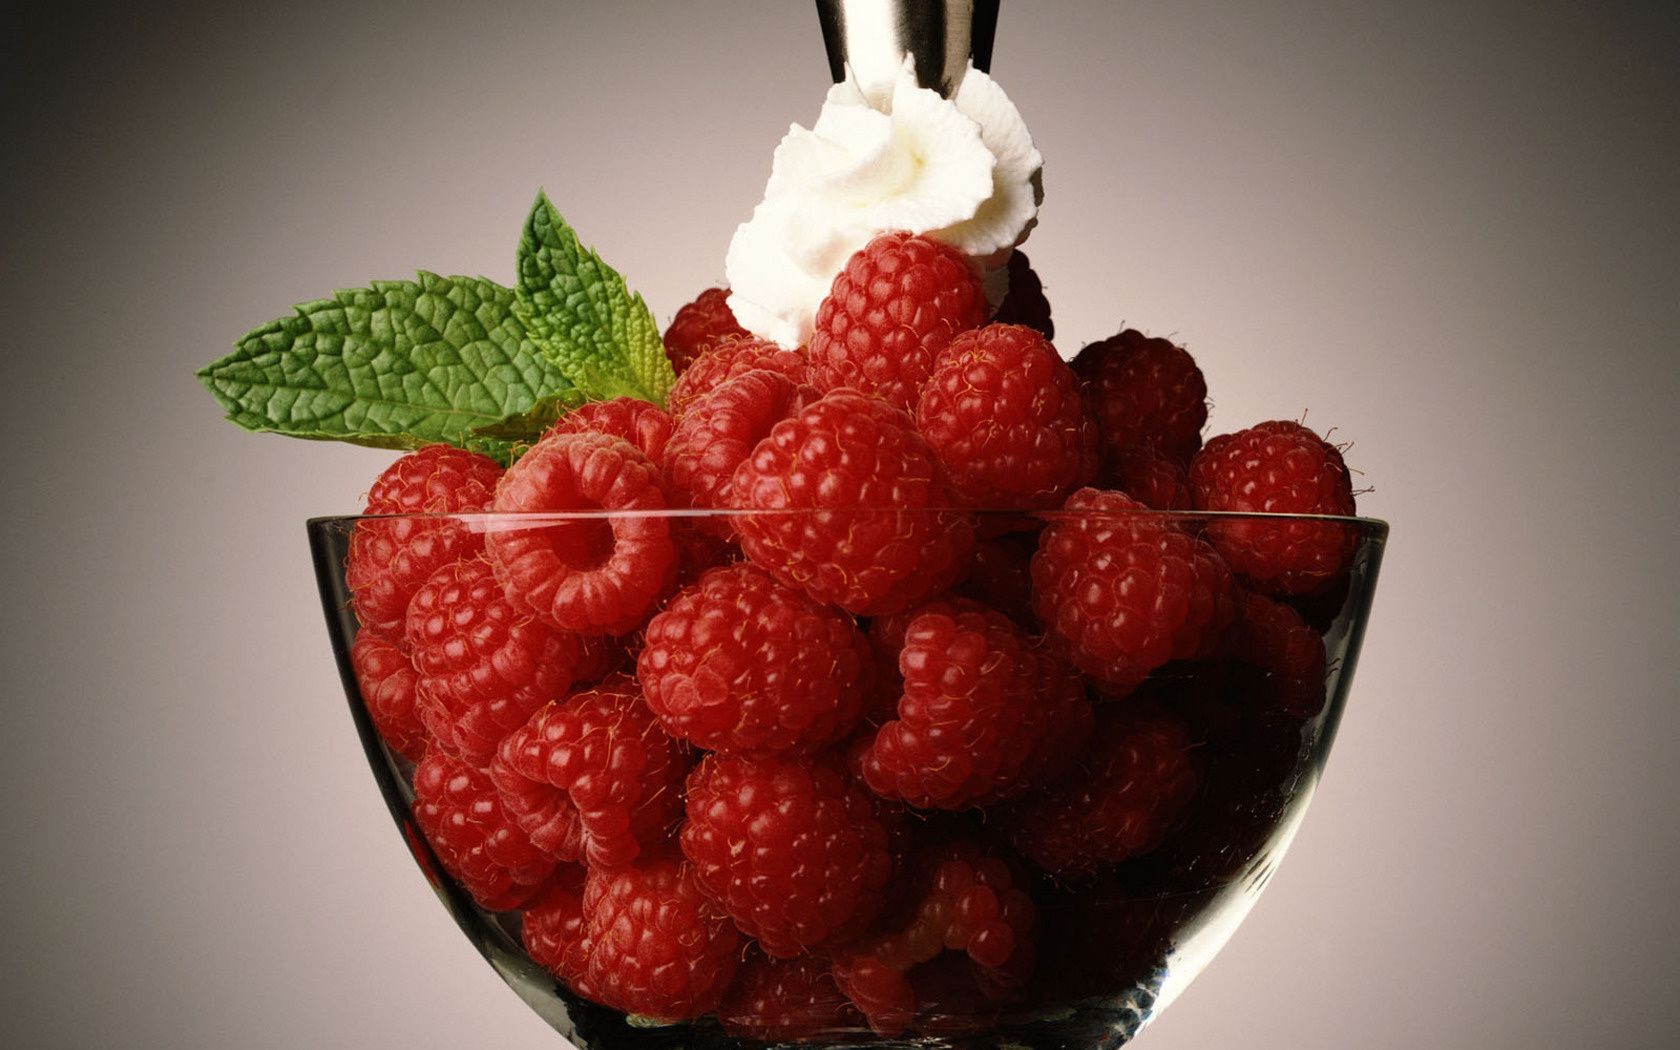 berries fruit sweet berry food delicious raspberry strawberry refreshment tasty juicy bowl diet epicure confection healthy